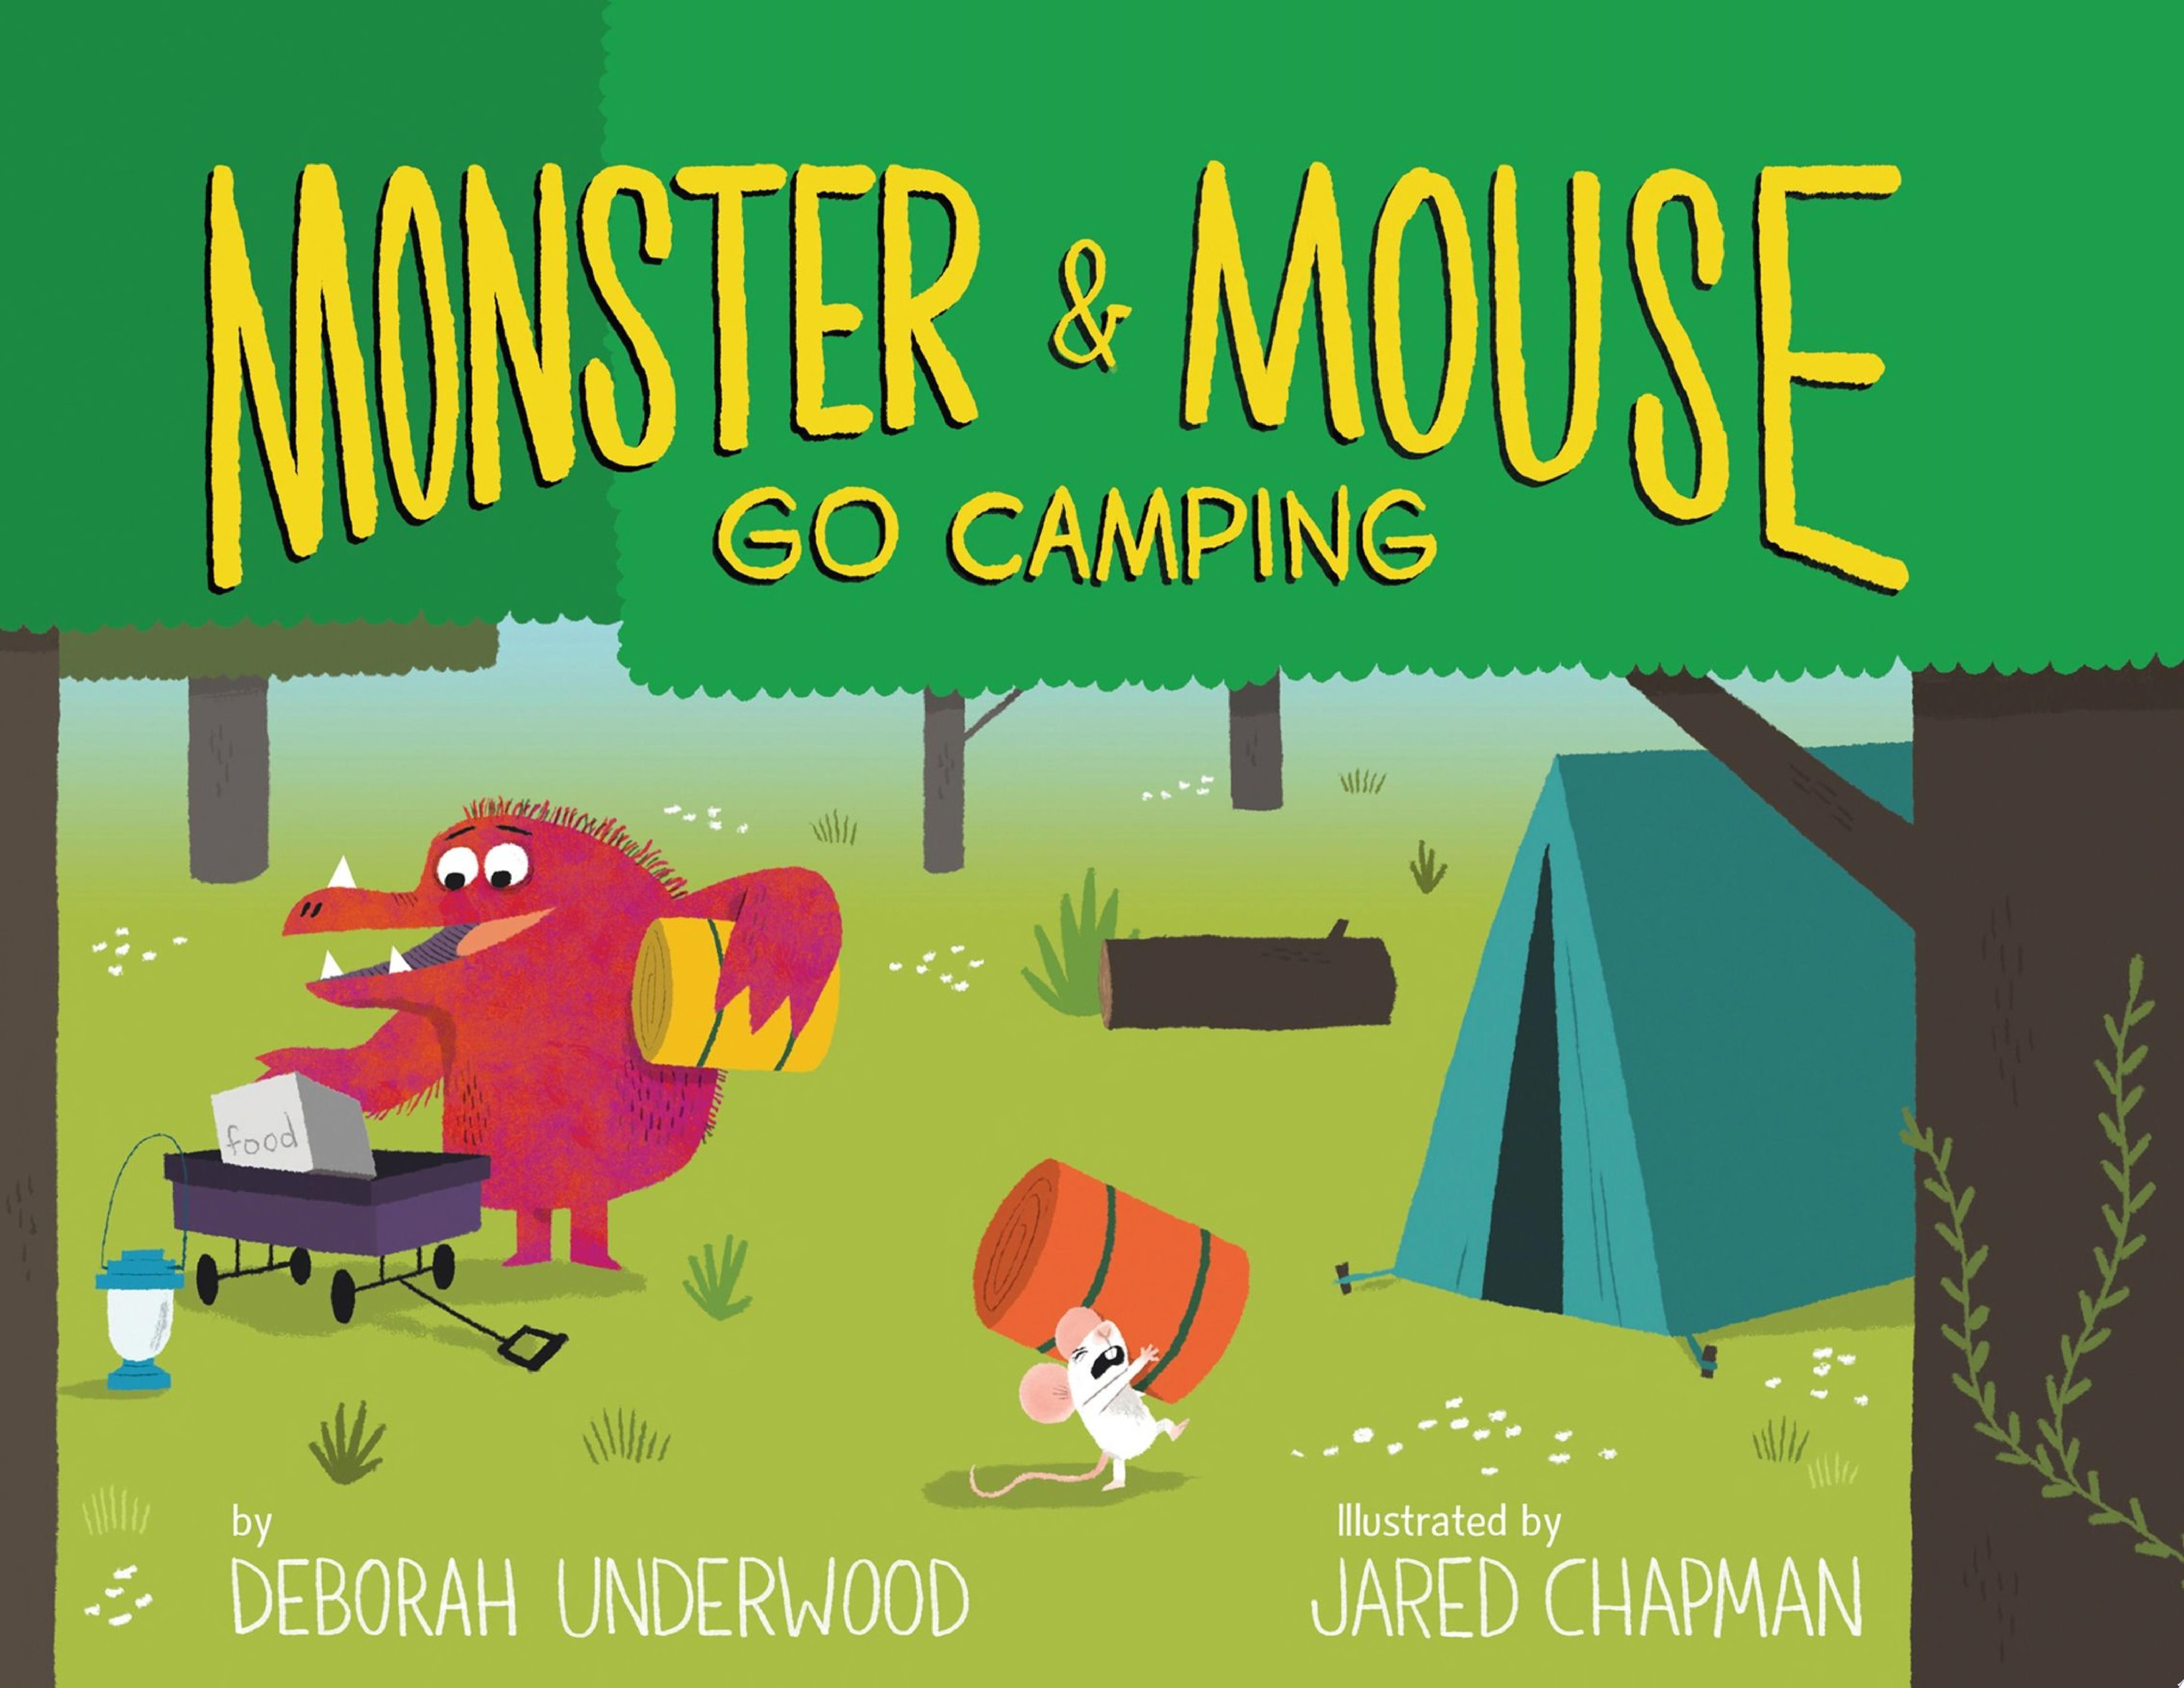 Image for "Monster and Mouse Go Camping"